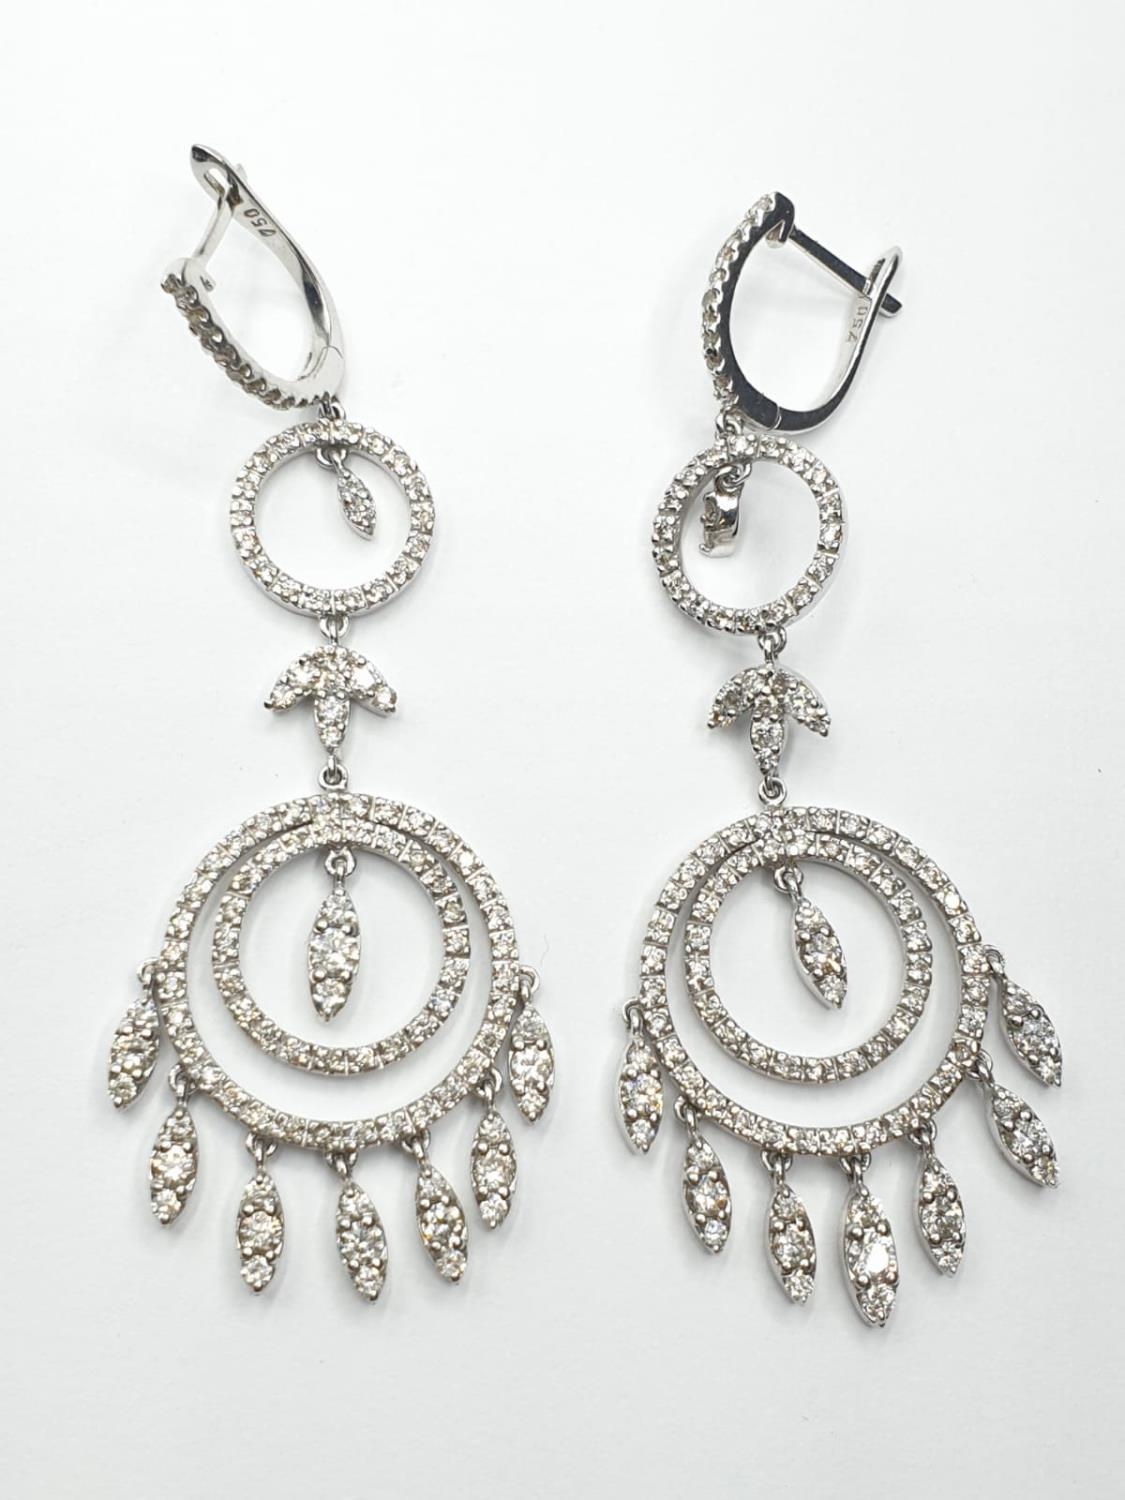 Pair of 18ct white gold and diamond drop earrings in the shape of dream catchers, weight 15.82g